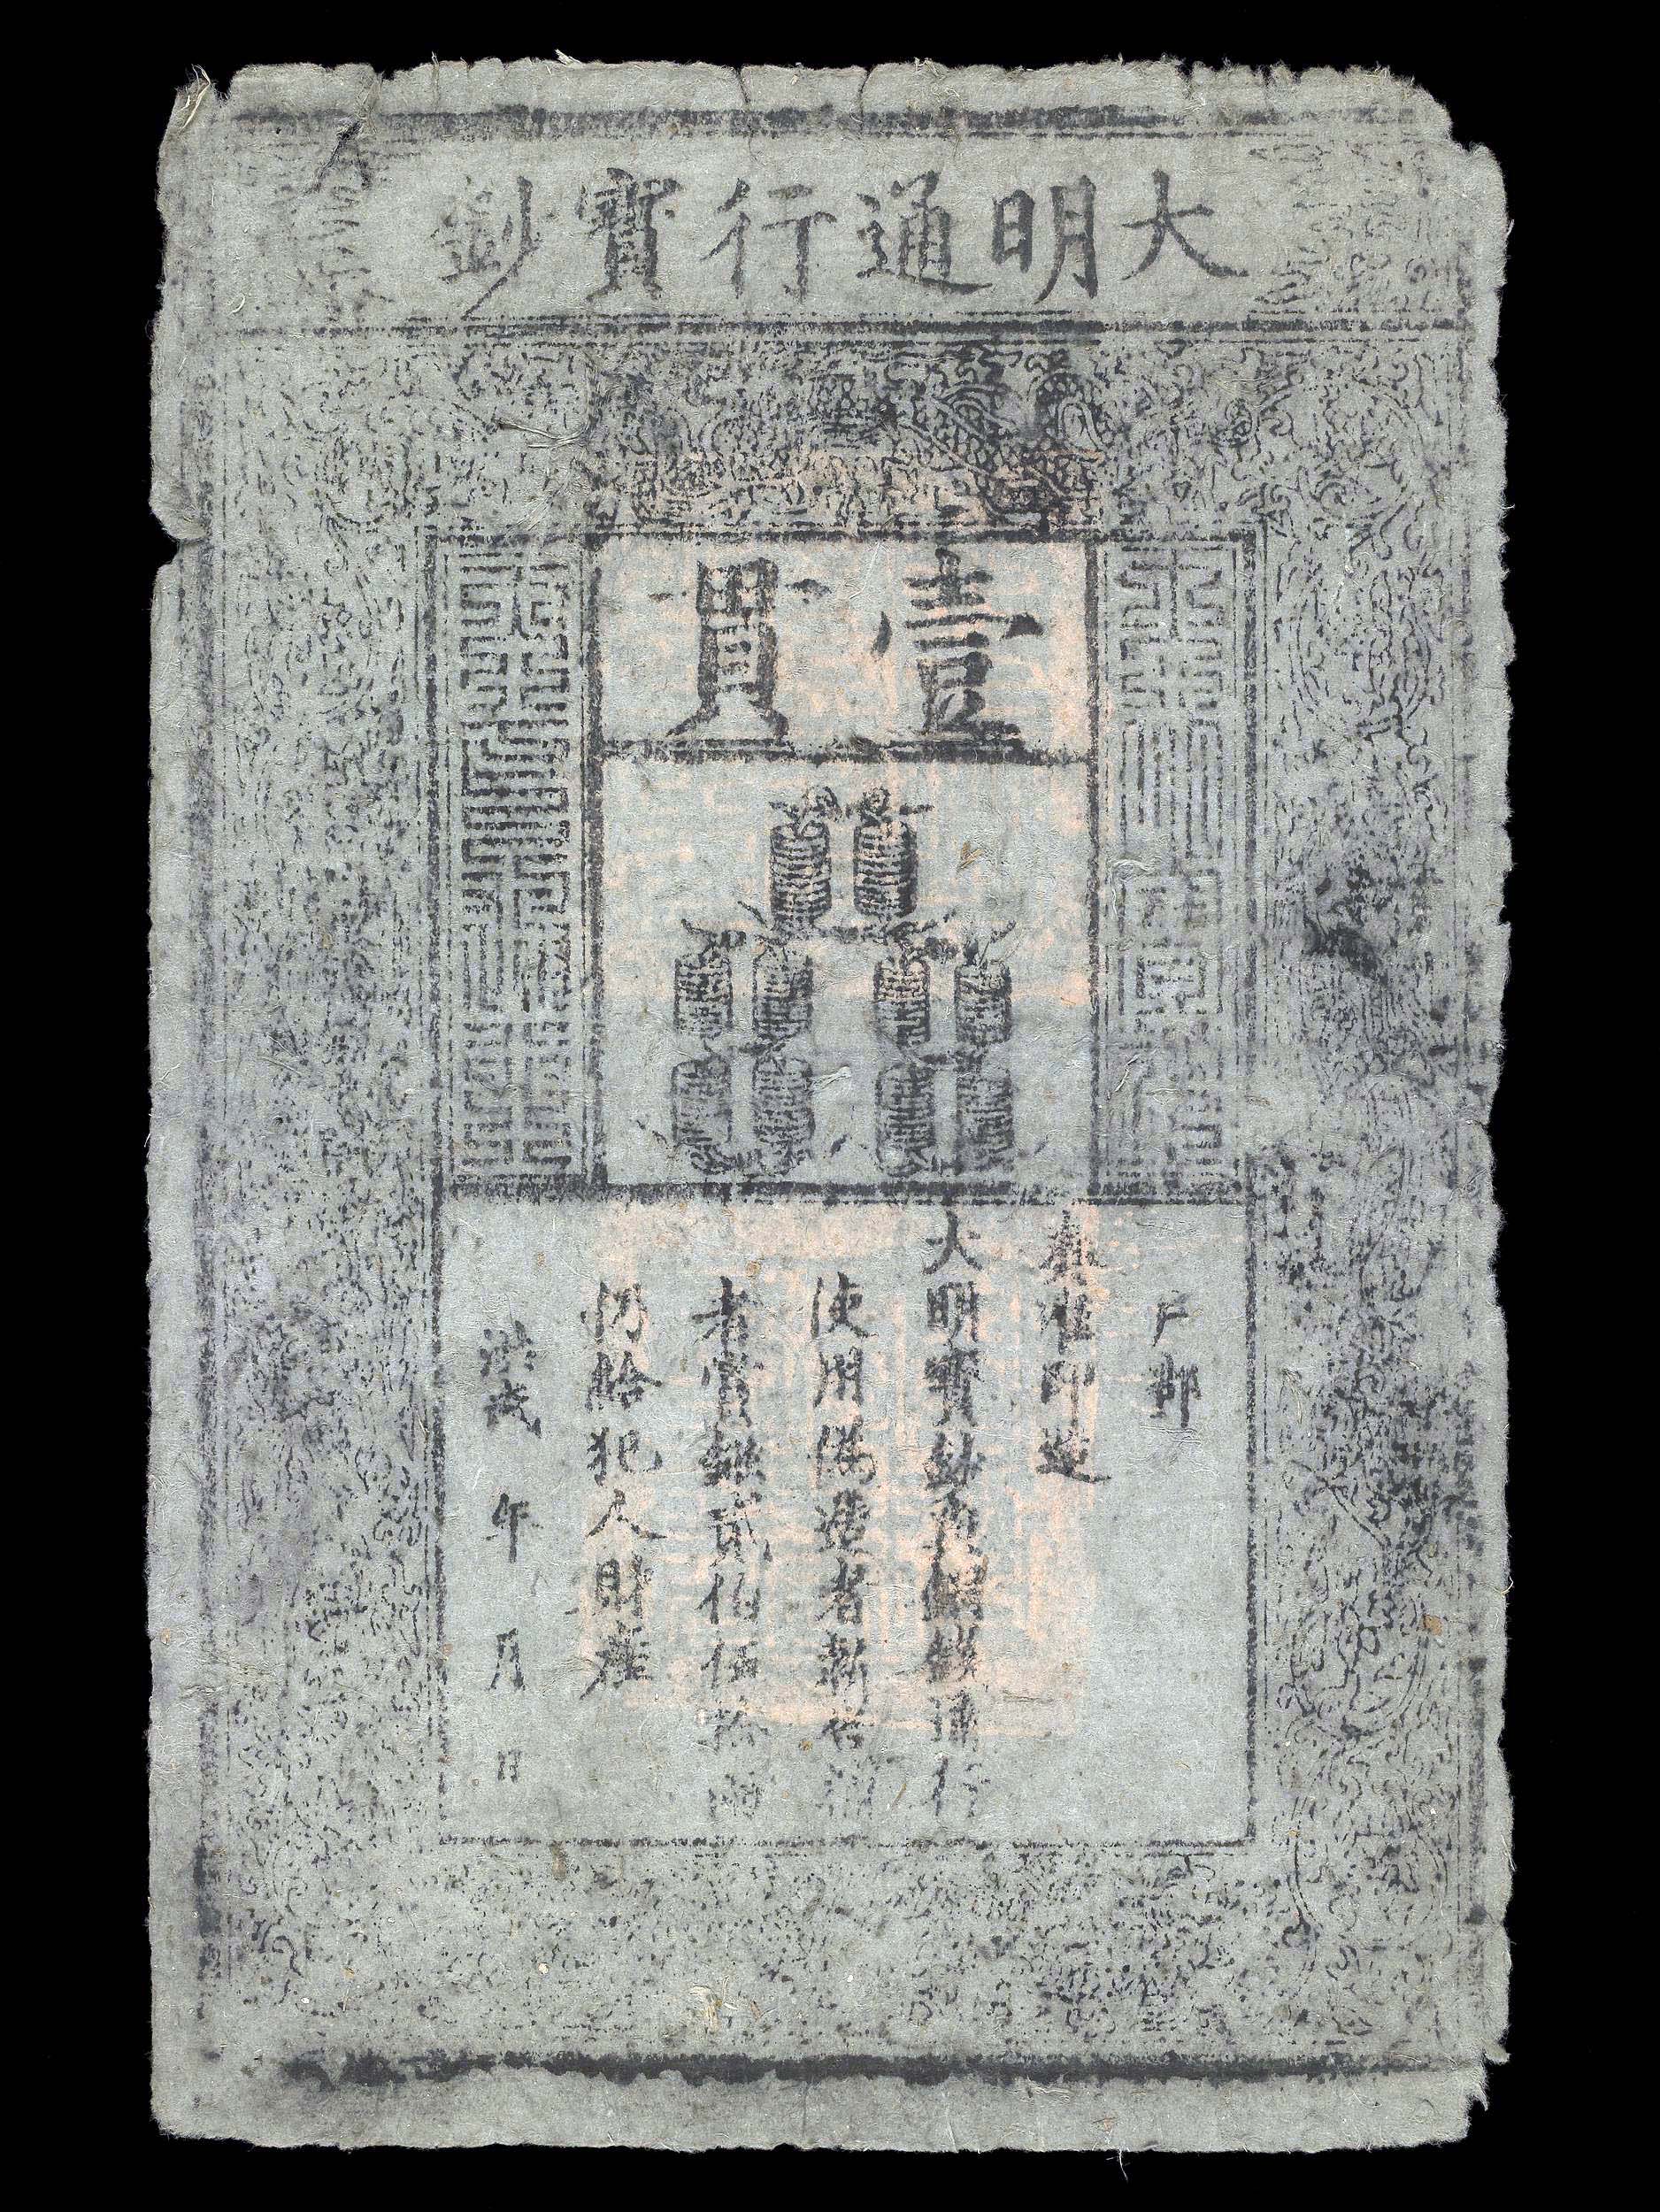 Ming banknote, 1375, Ming Dynasty, China, paper, 34 x 21.8 cm (© Trustees of the British Museum)